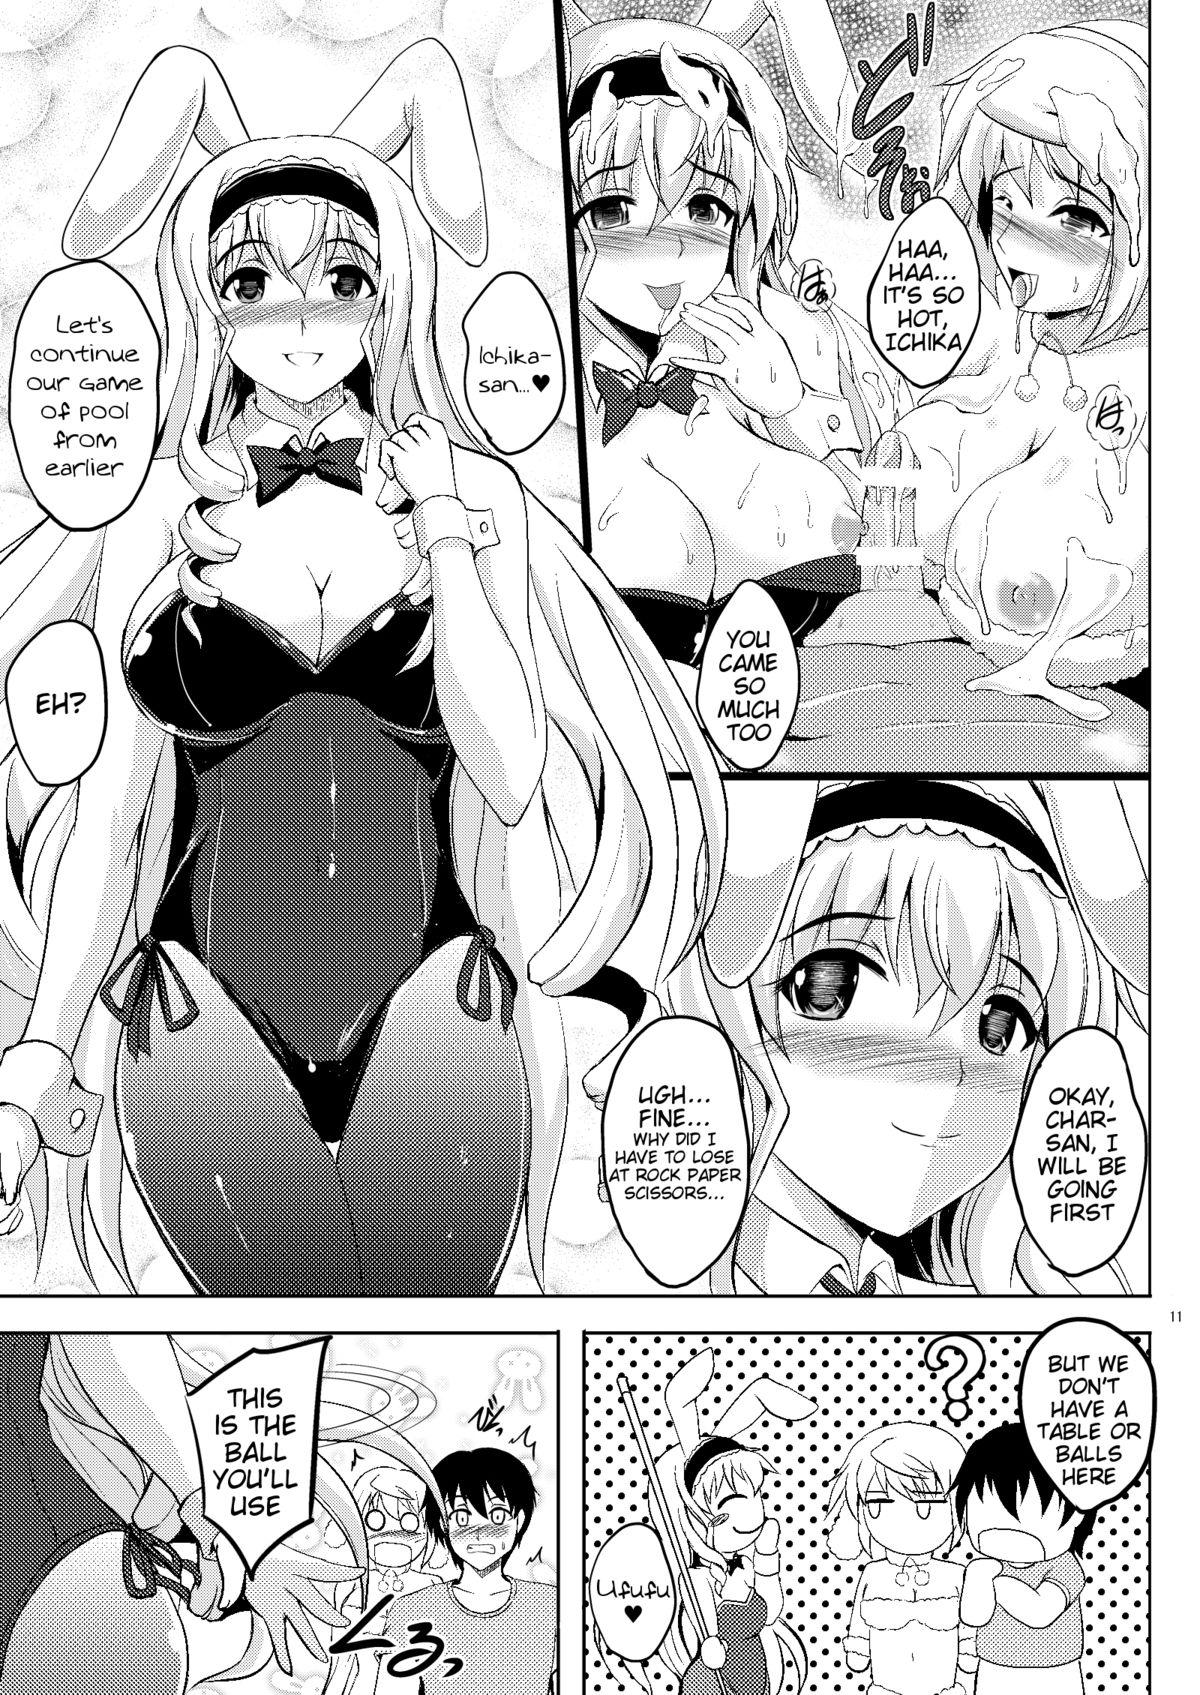 Phat Ass Poodle & Bunny Time - Infinite stratos Fleshlight - Page 11